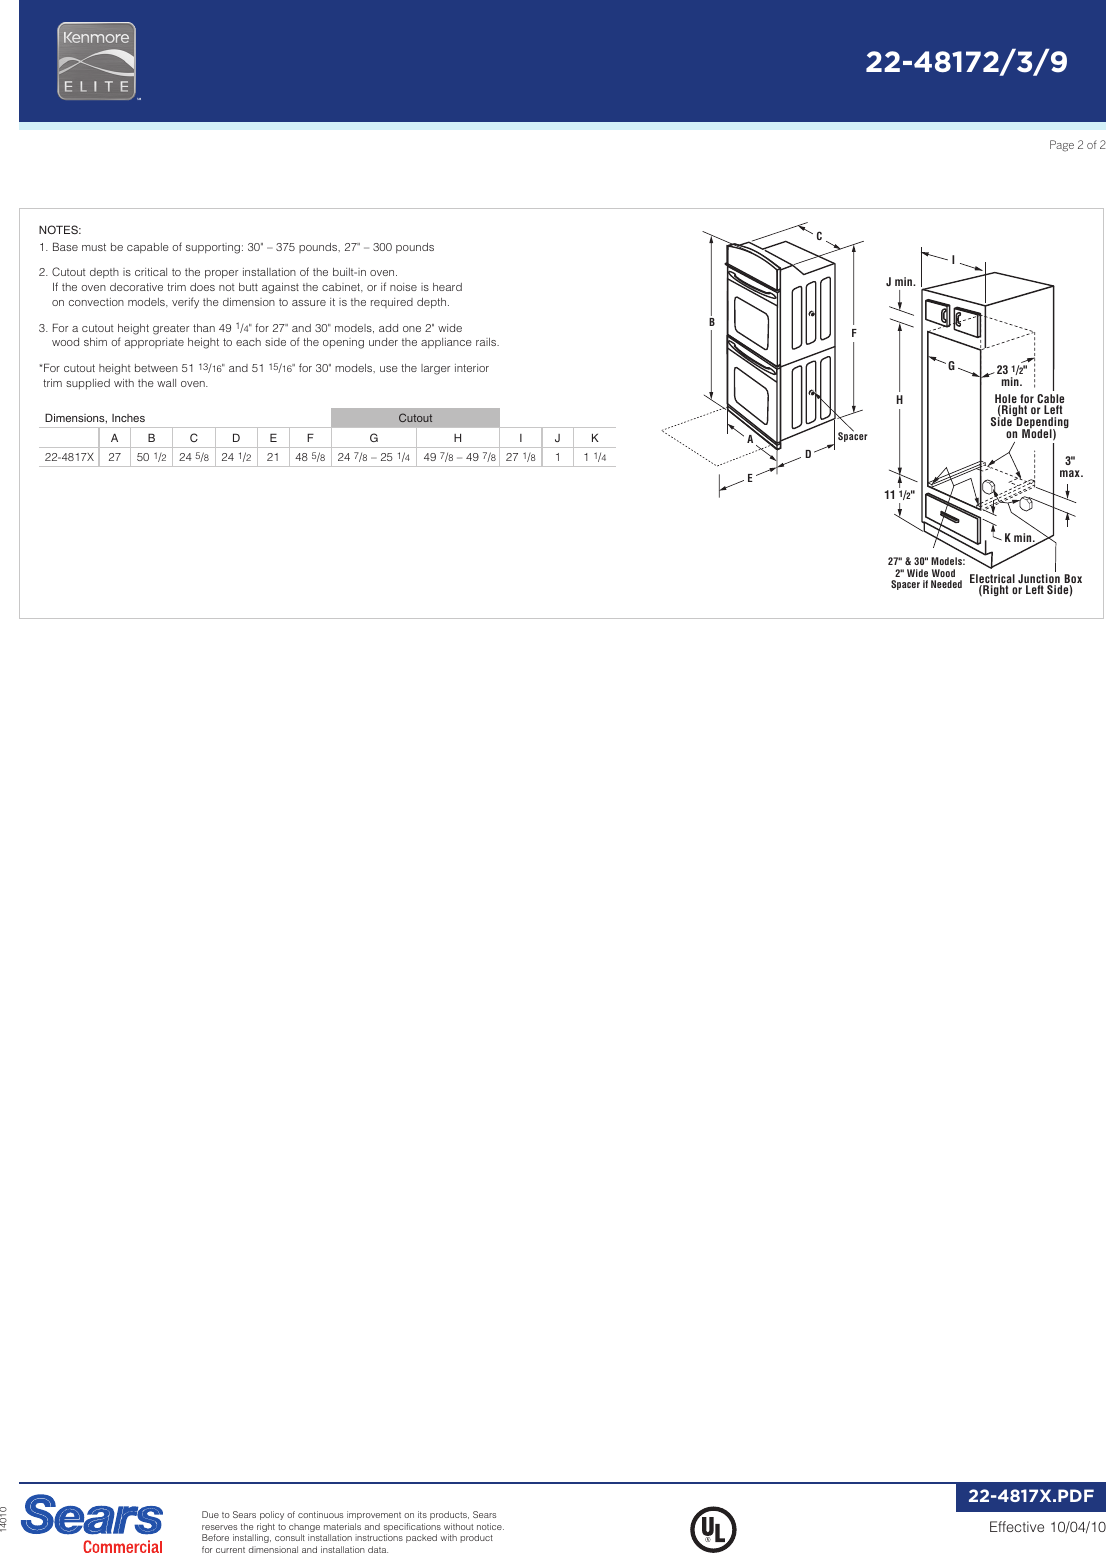 Page 2 of 2 - Kenmore Kenmore-Kenmore-Elite-27-Double-Wall-Oven-Installation-Instructions-  Kenmore-kenmore-elite-27-double-wall-oven-installation-instructions